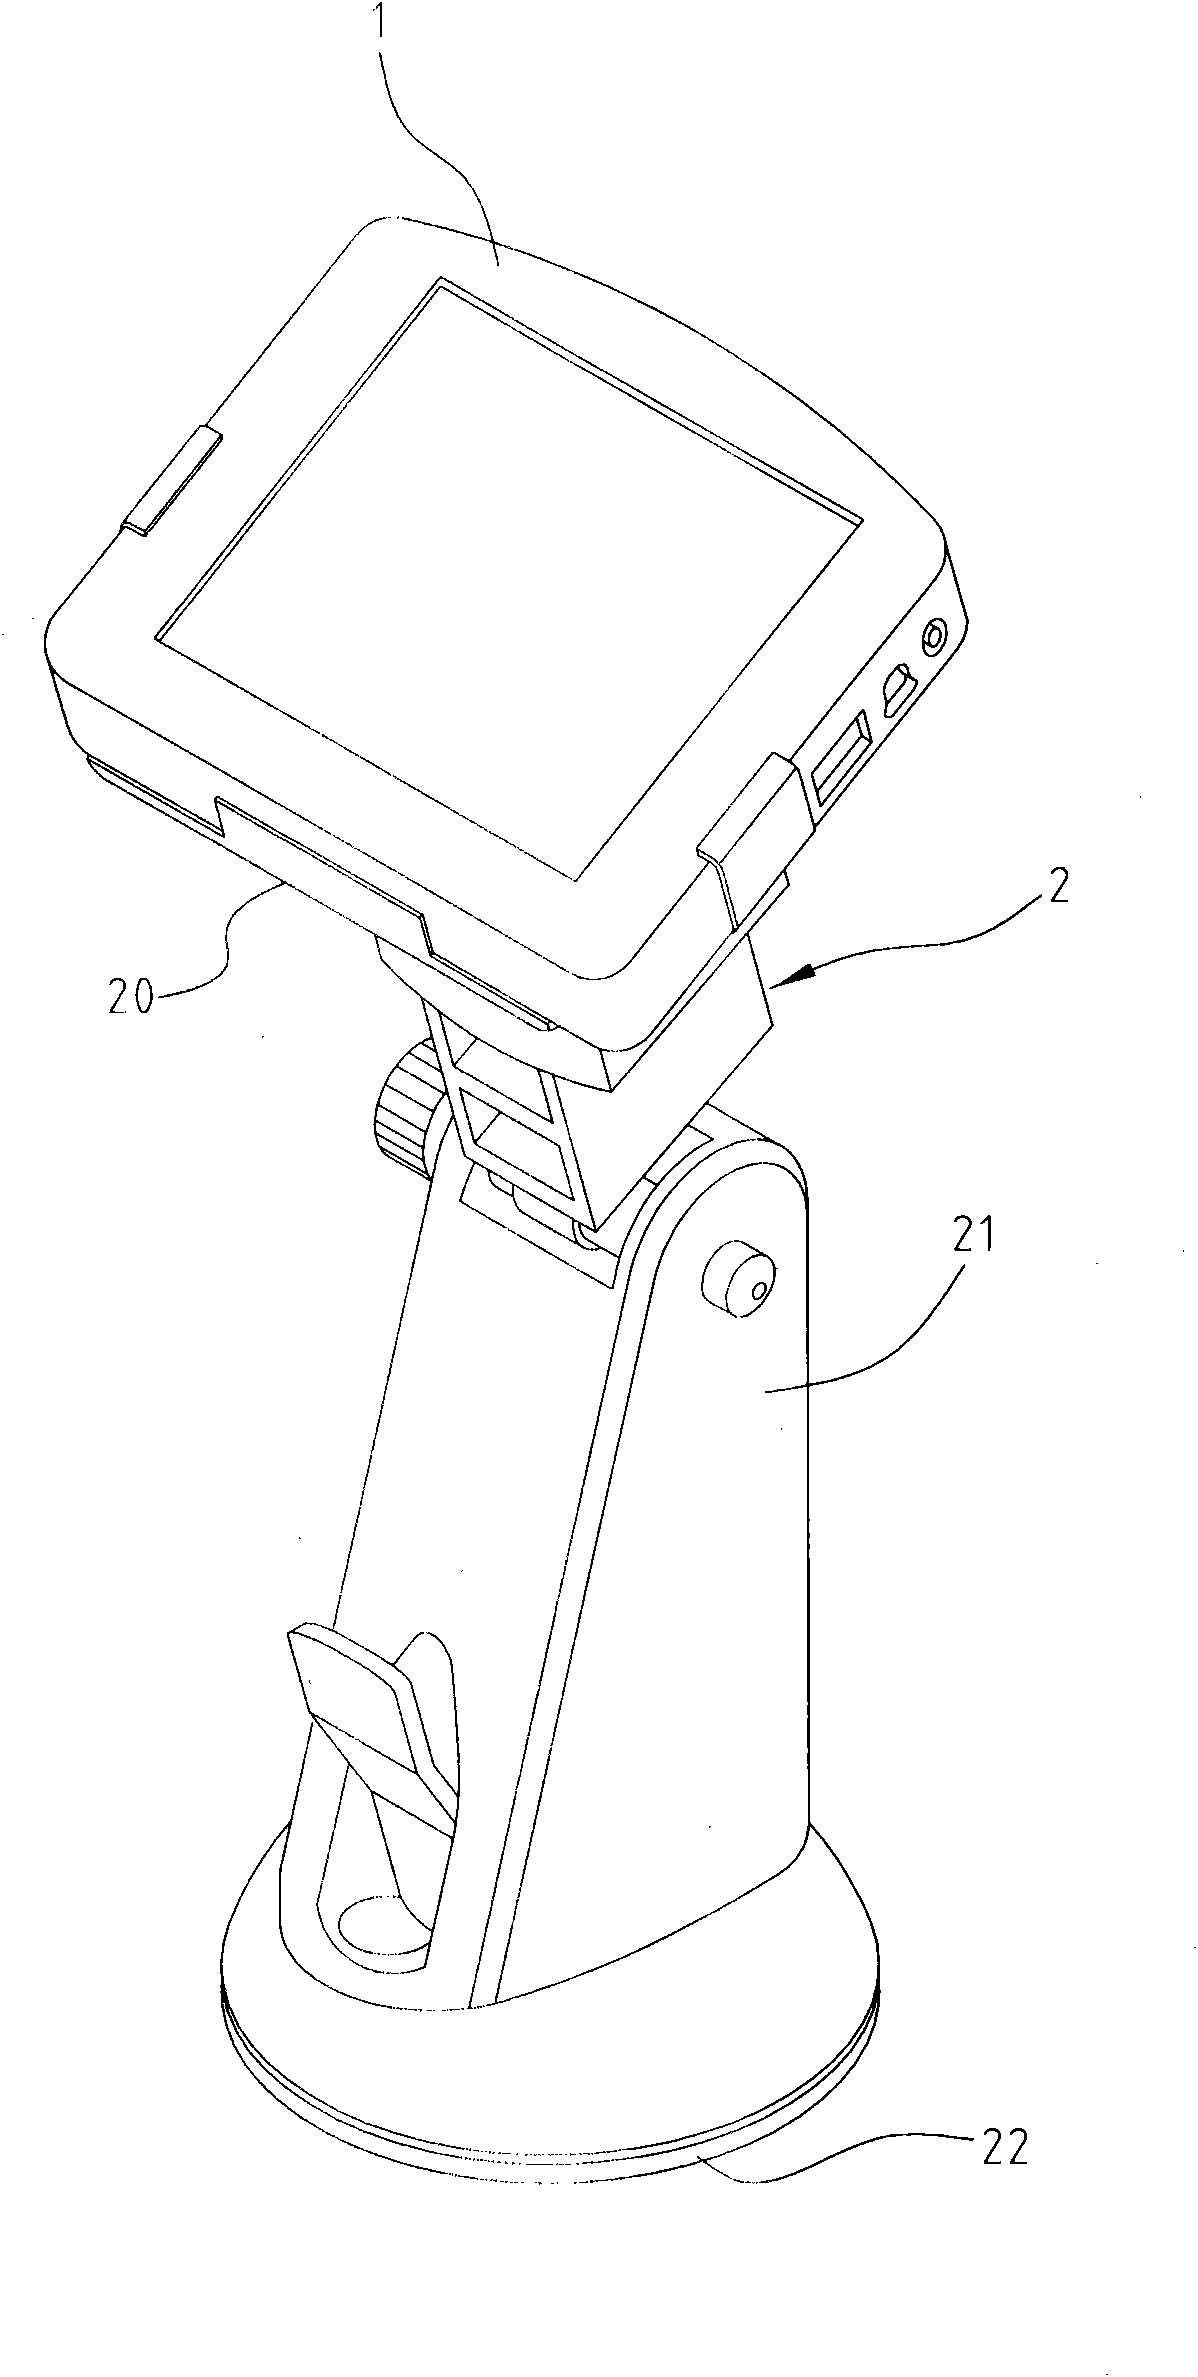 Communication equipment suspension device applied to vehicle